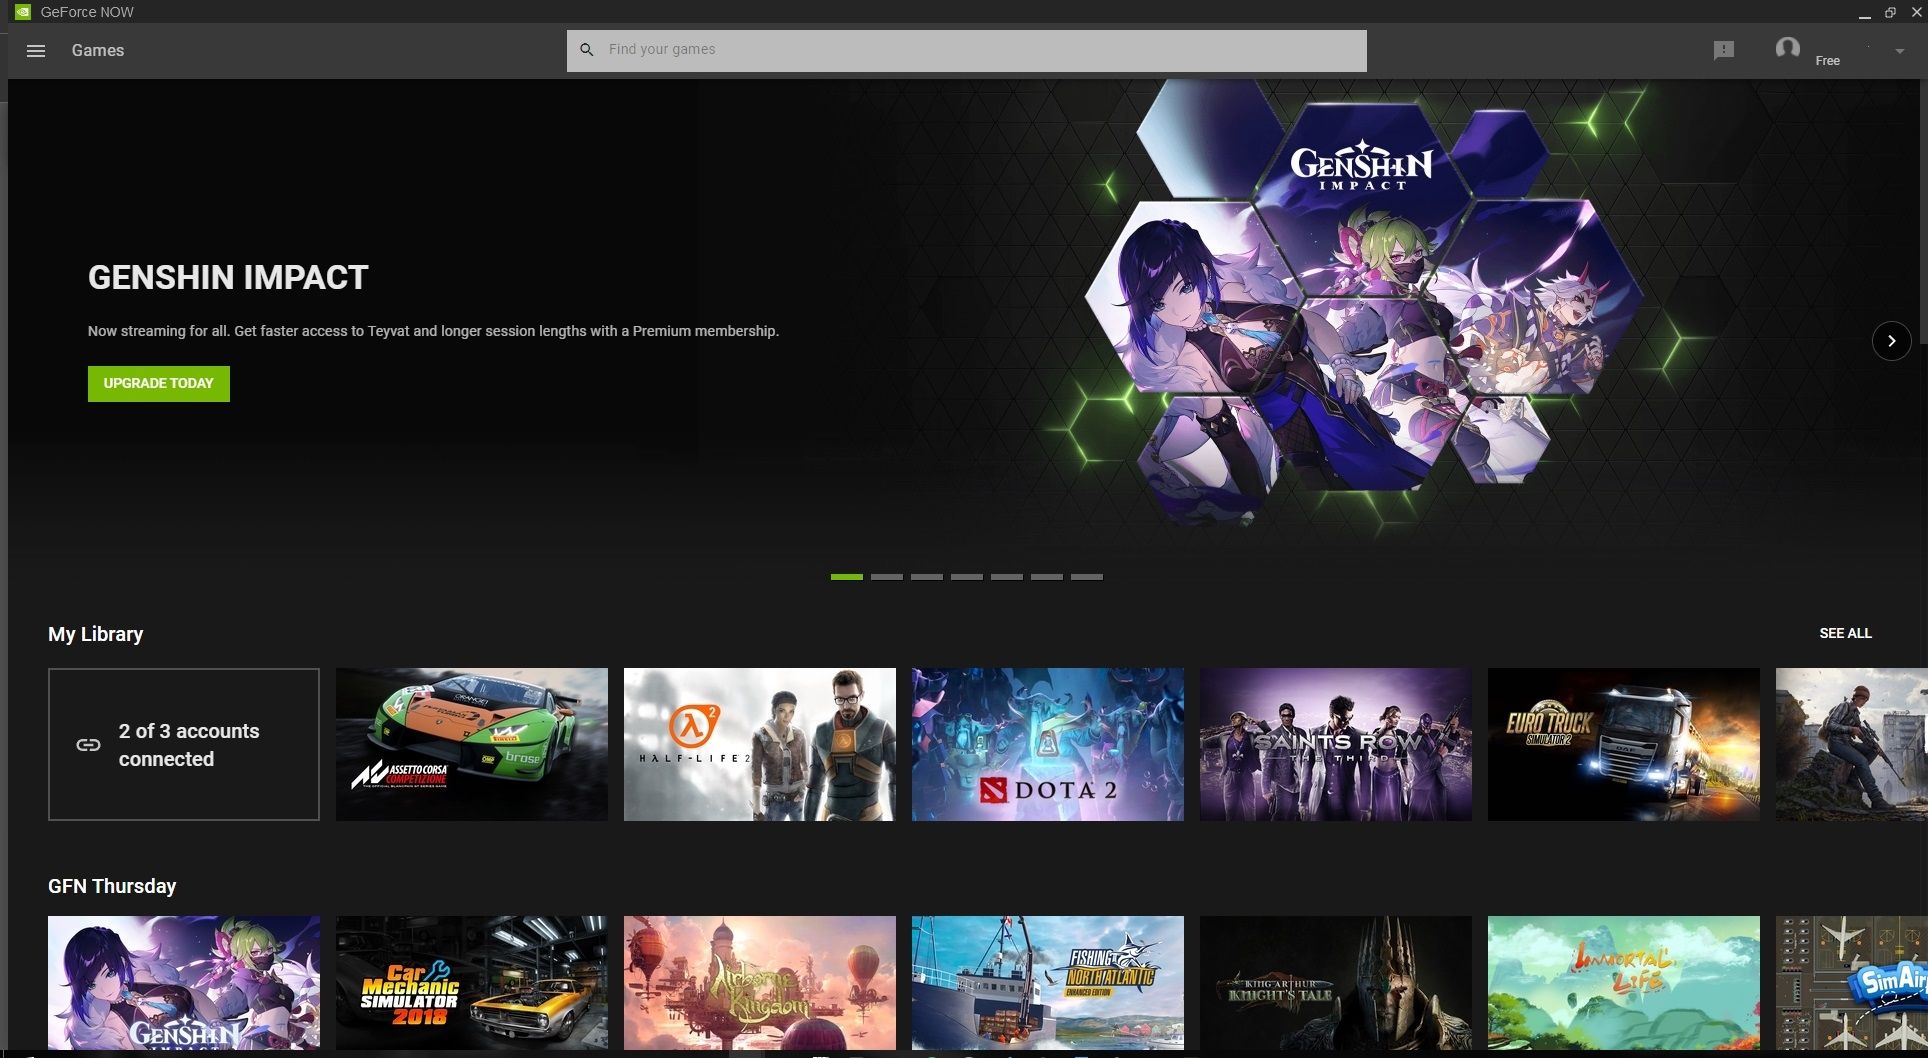 nvidia geforce now home page with game listings